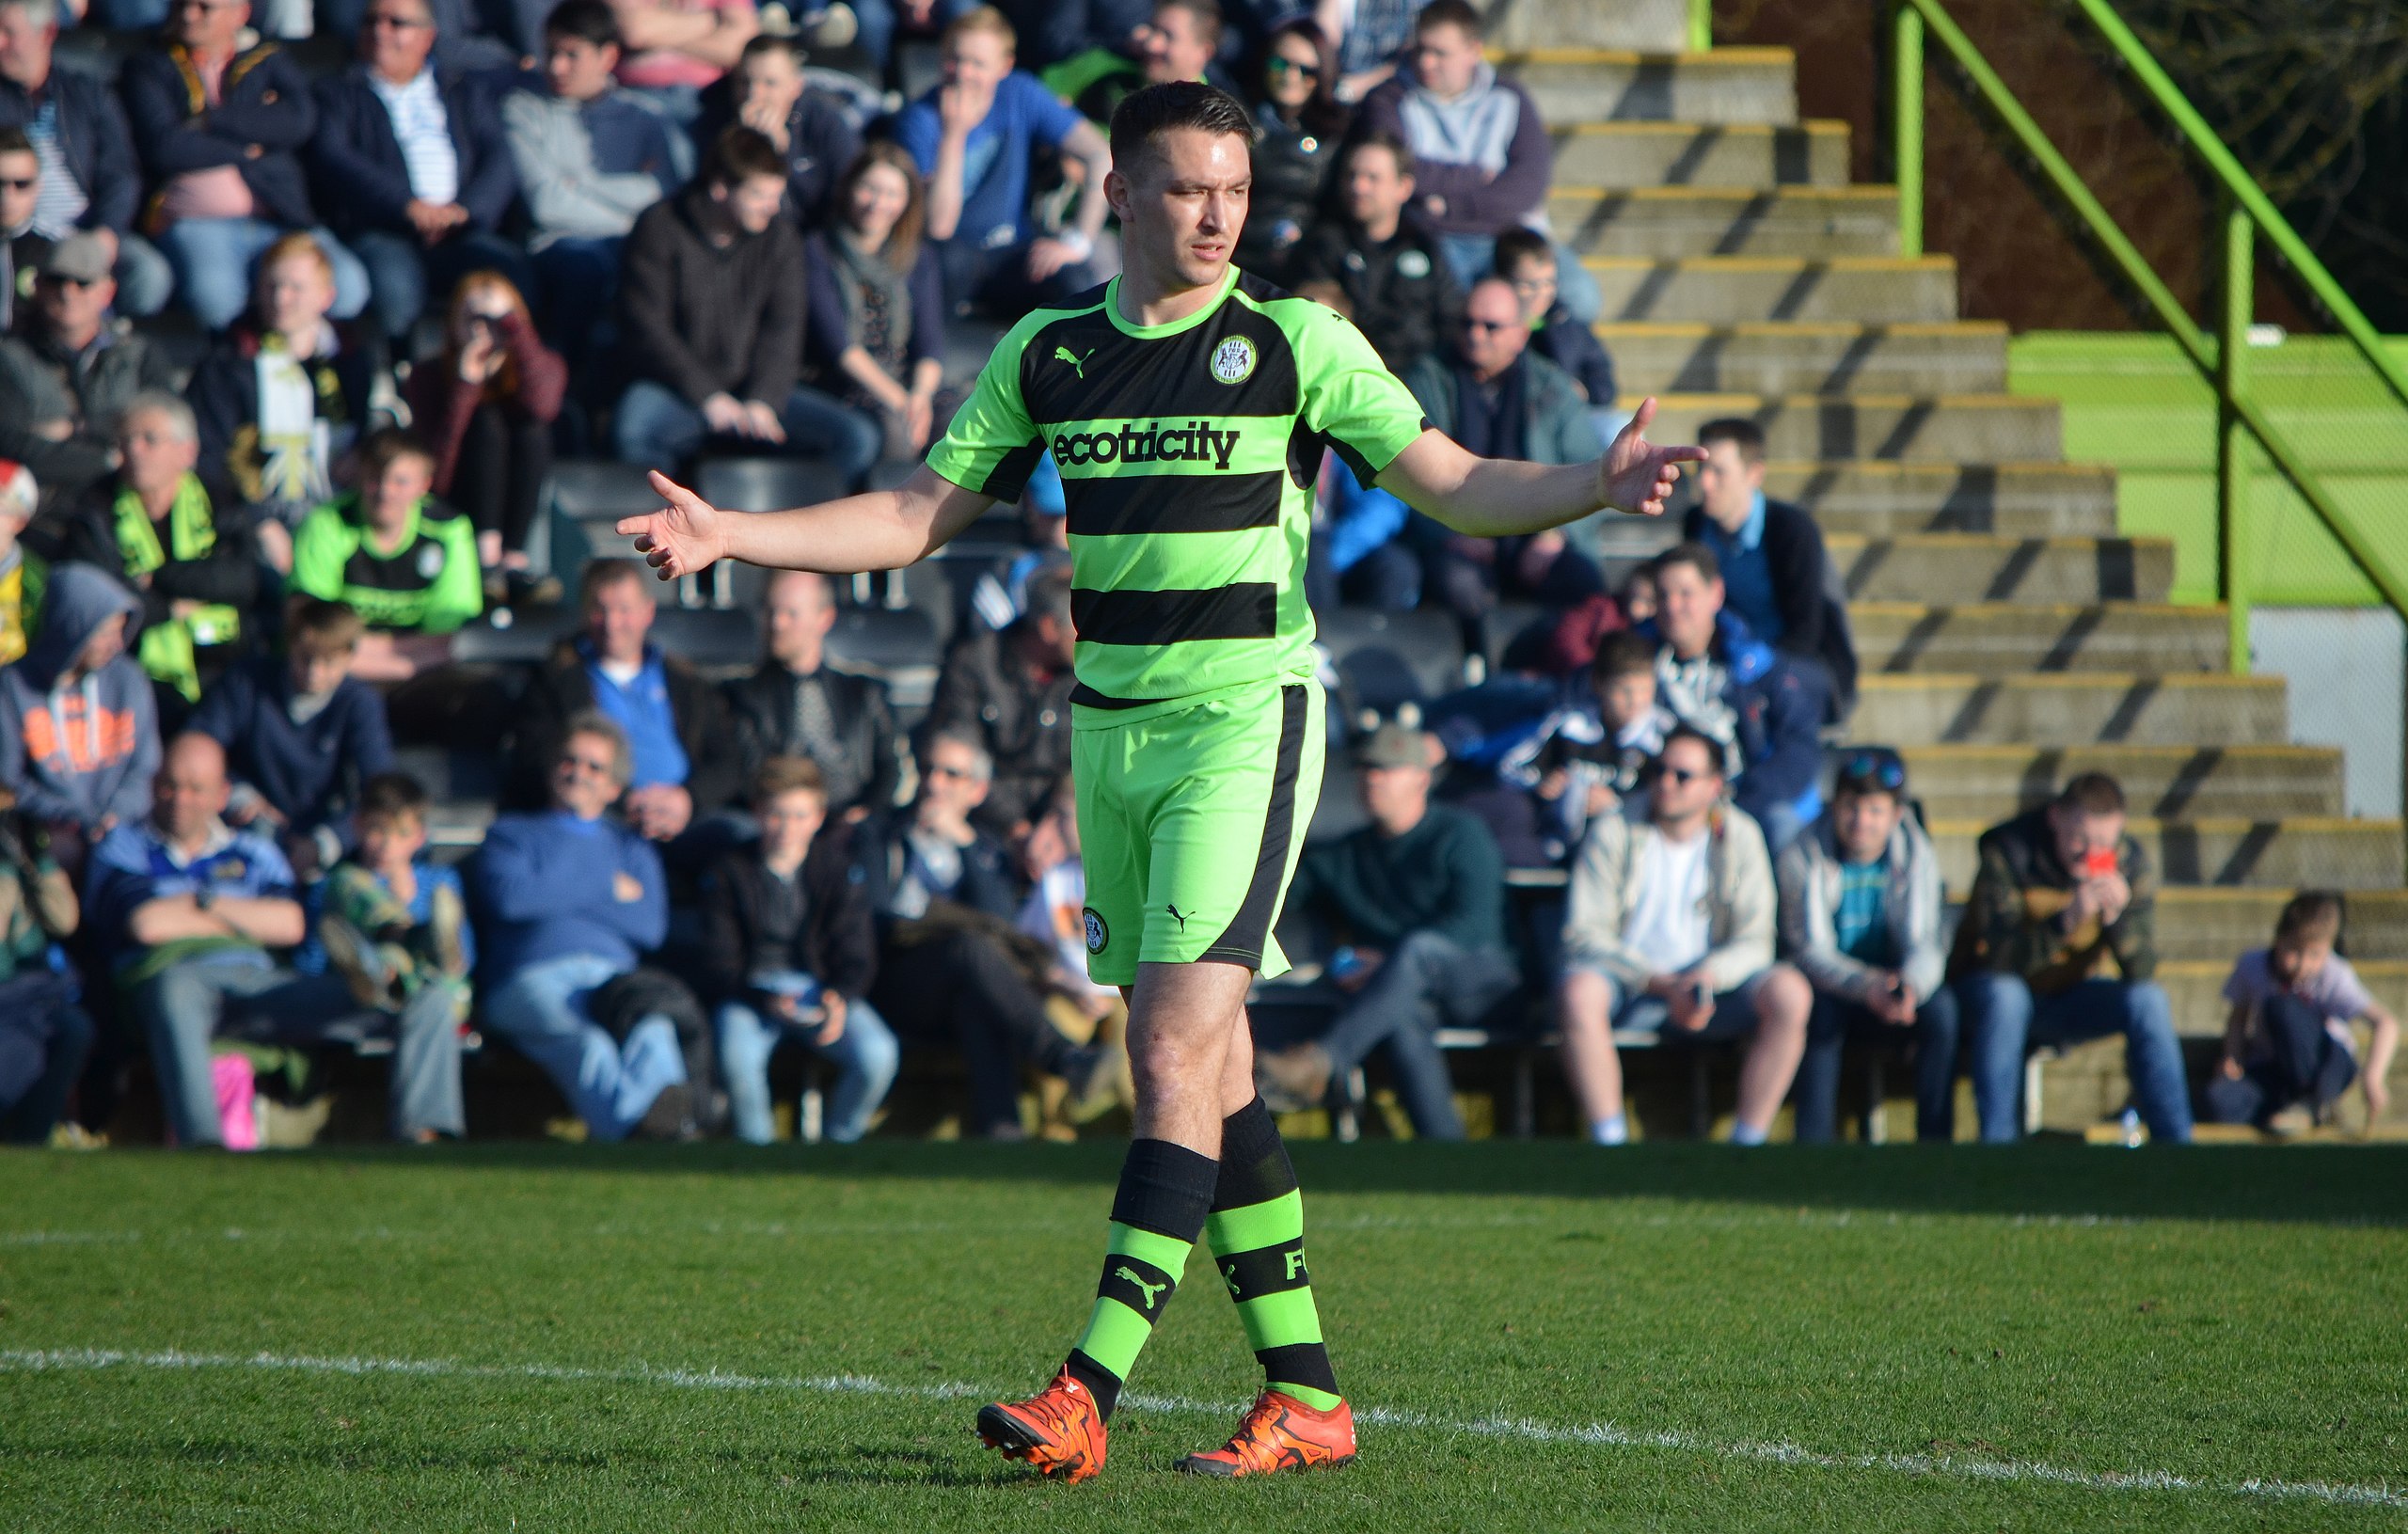 Photo Nick (Creative Commons Attribution 2.0 Generic) Link: (https://commons.wikimedia.org/wiki/File:Forest_Green_Rovers_V_Aldershot_(25955244222).jpg)